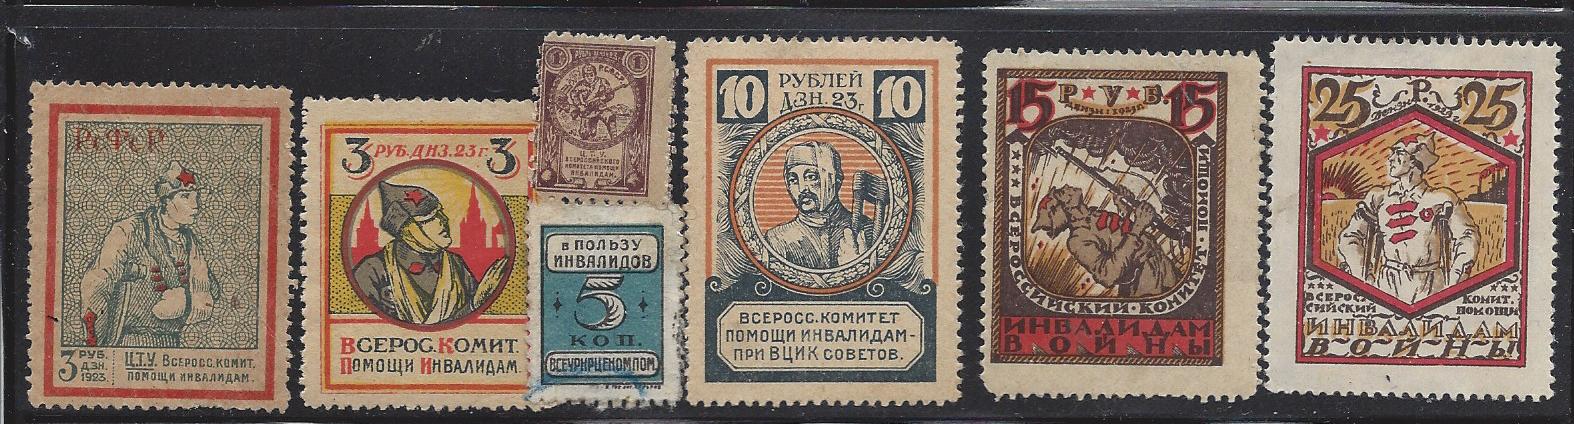 Russia Specialized - Postal Savings & Revenue Charity stamps Scott 3 